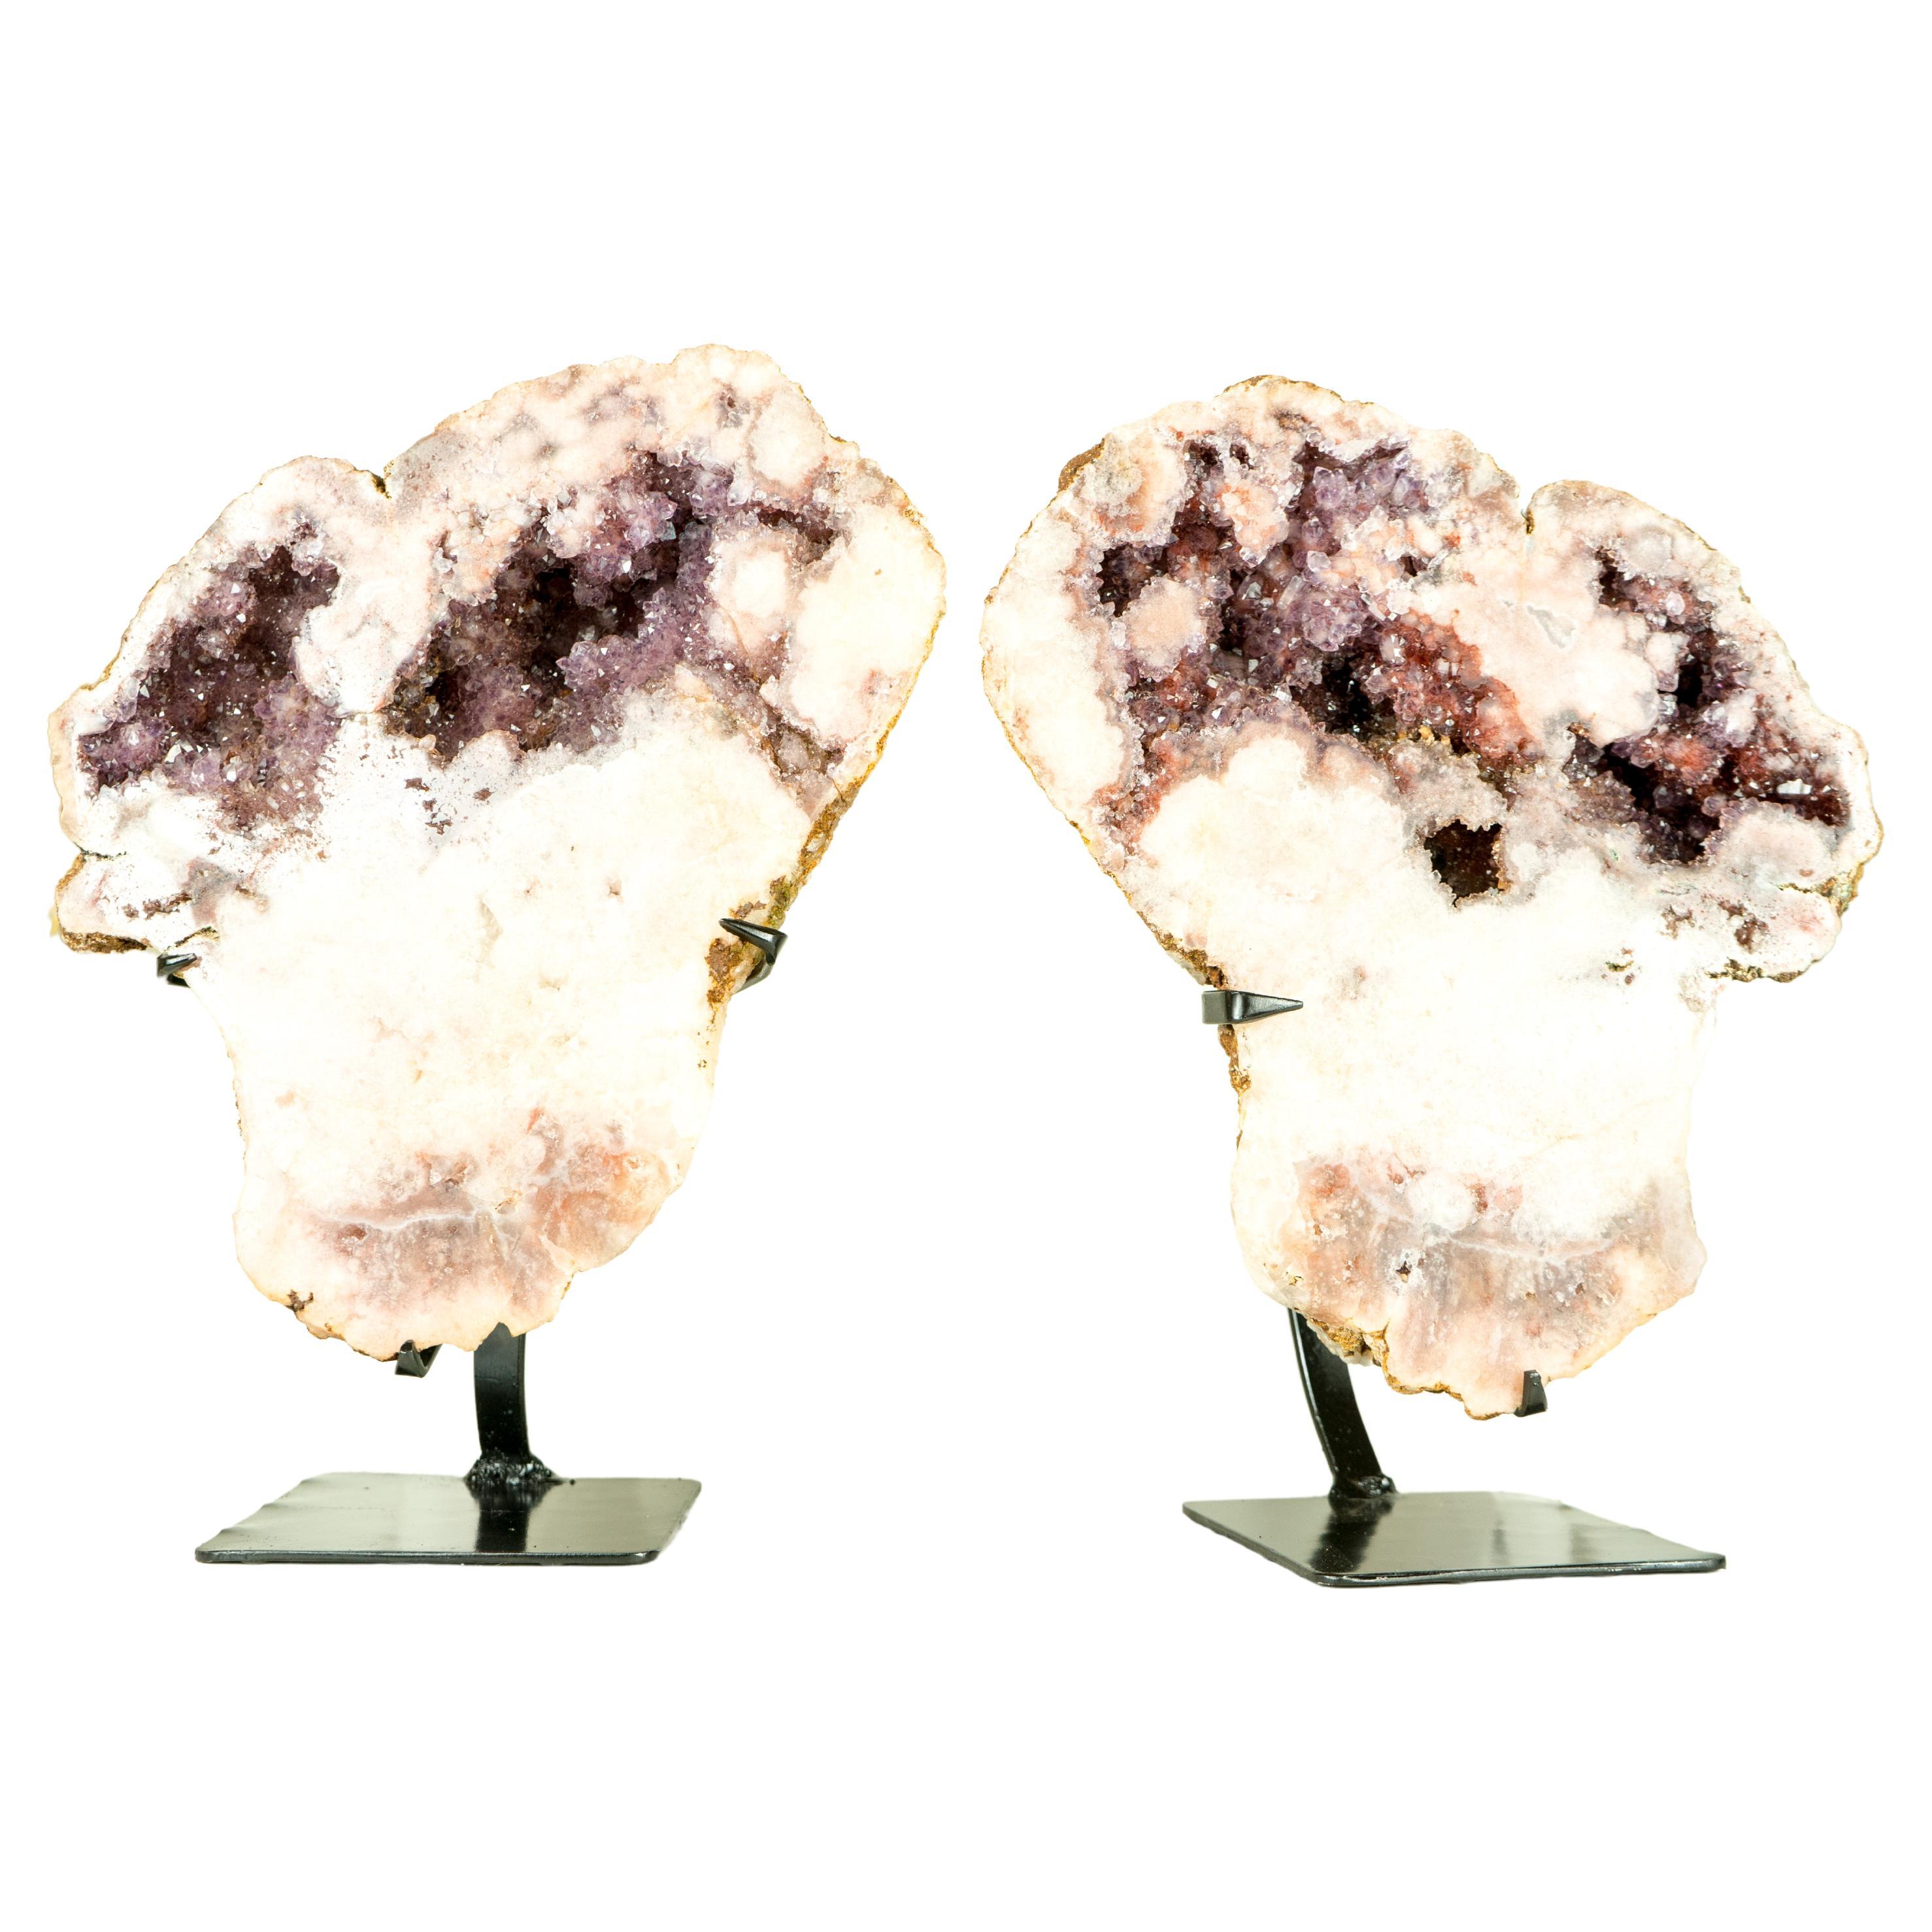 Rare Pair of All-Natural Pink Amethyst Geodes with Red and Lavender Amethyst For Sale